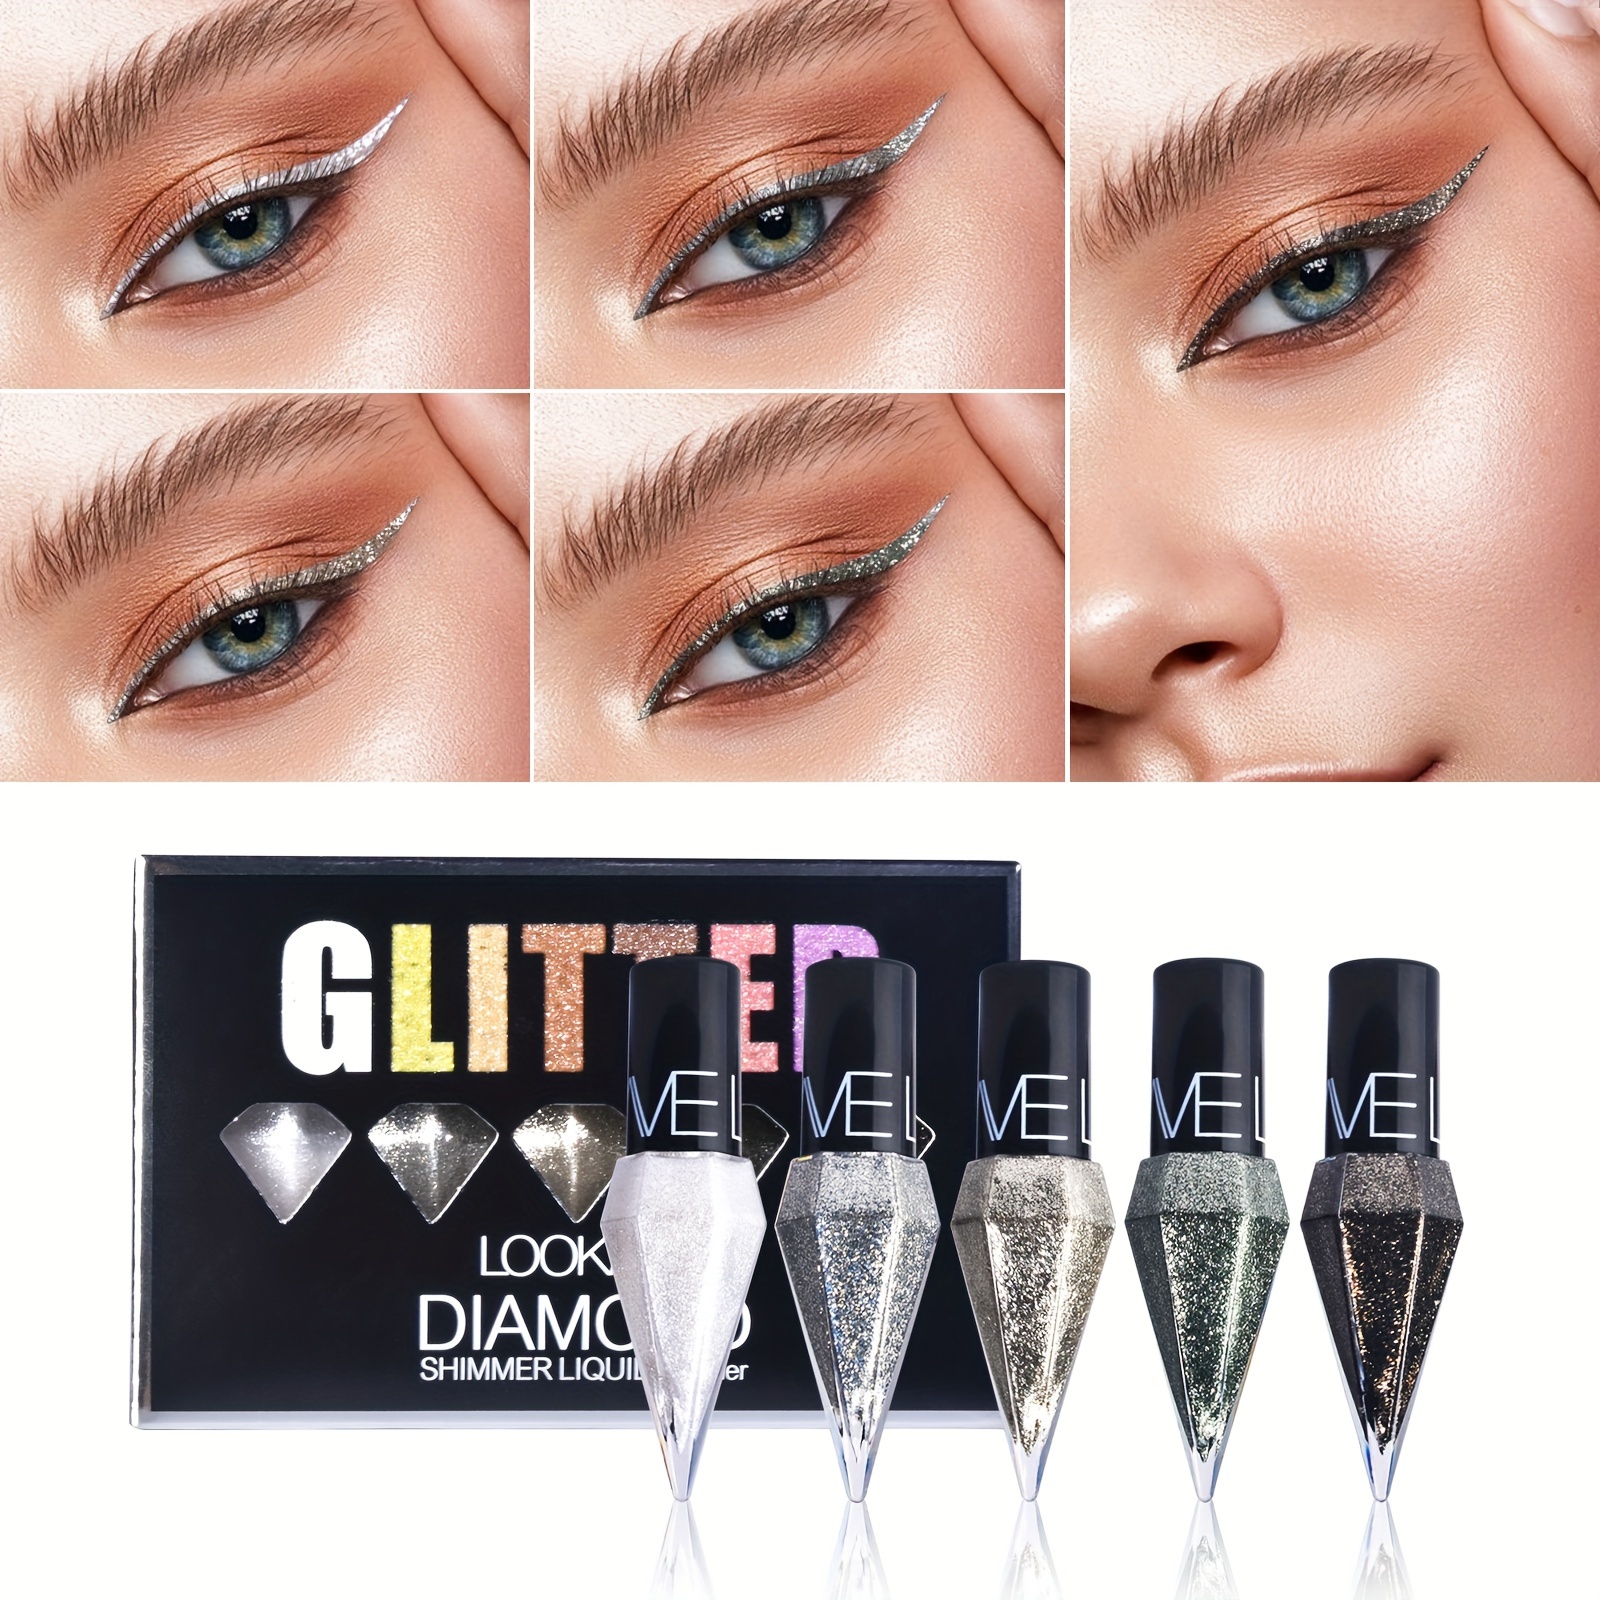 

5pc Shimmer Liquid Eyeliner Set, Waterproof, Smudge-proof, Glitter Eye Makeup With Silver And Rose Golden Sparkles, Eye Shadow Stick Combo For Cosmetics